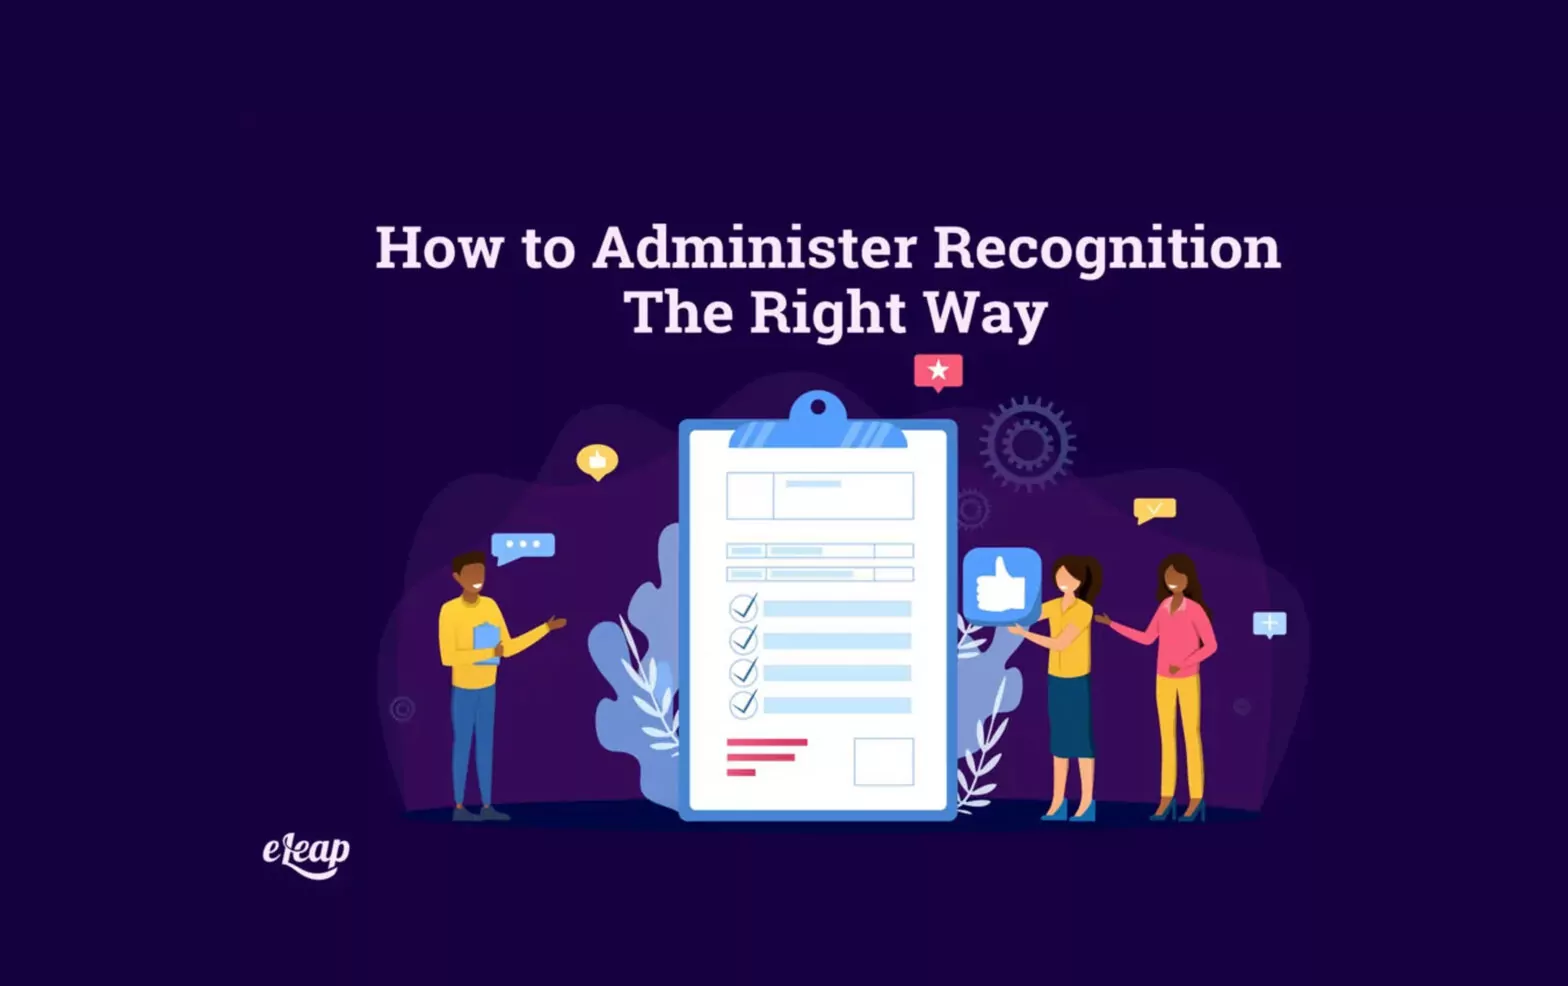 How to Administer Recognition The Right Way